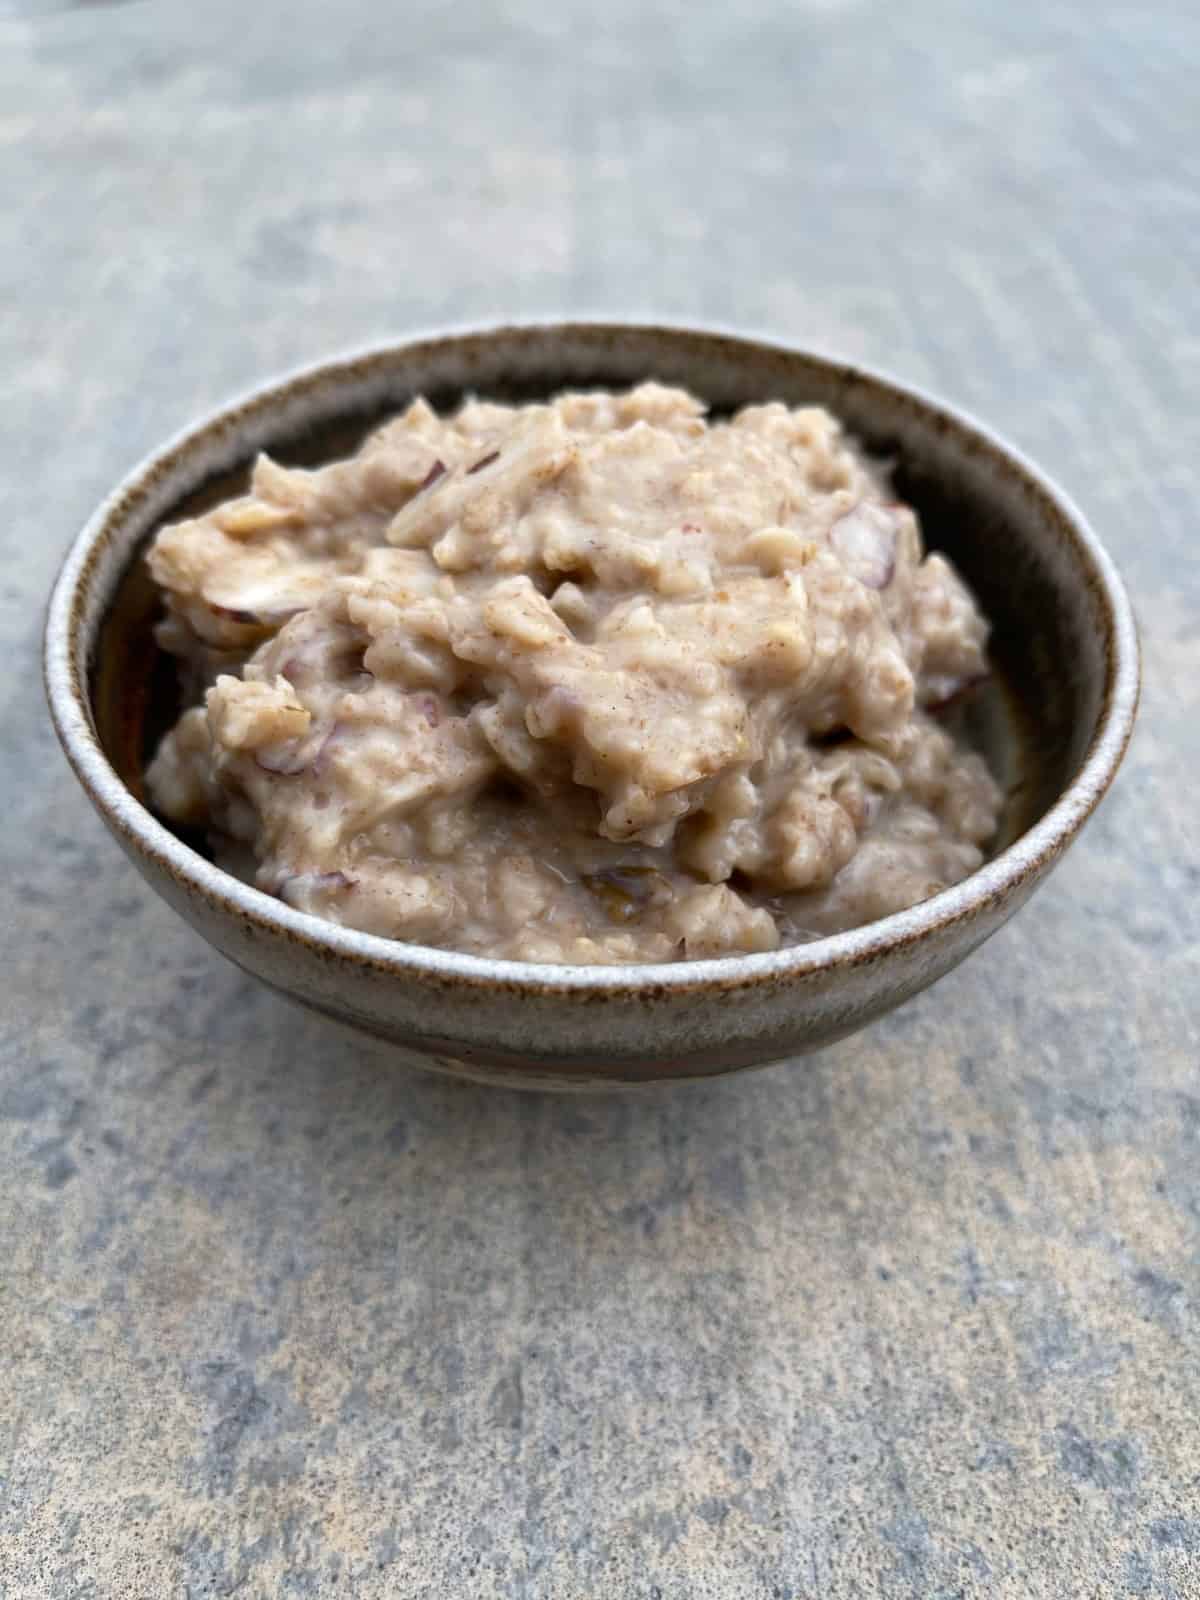 Slow cooker almond date oatmeal in brown ceramic bowl.